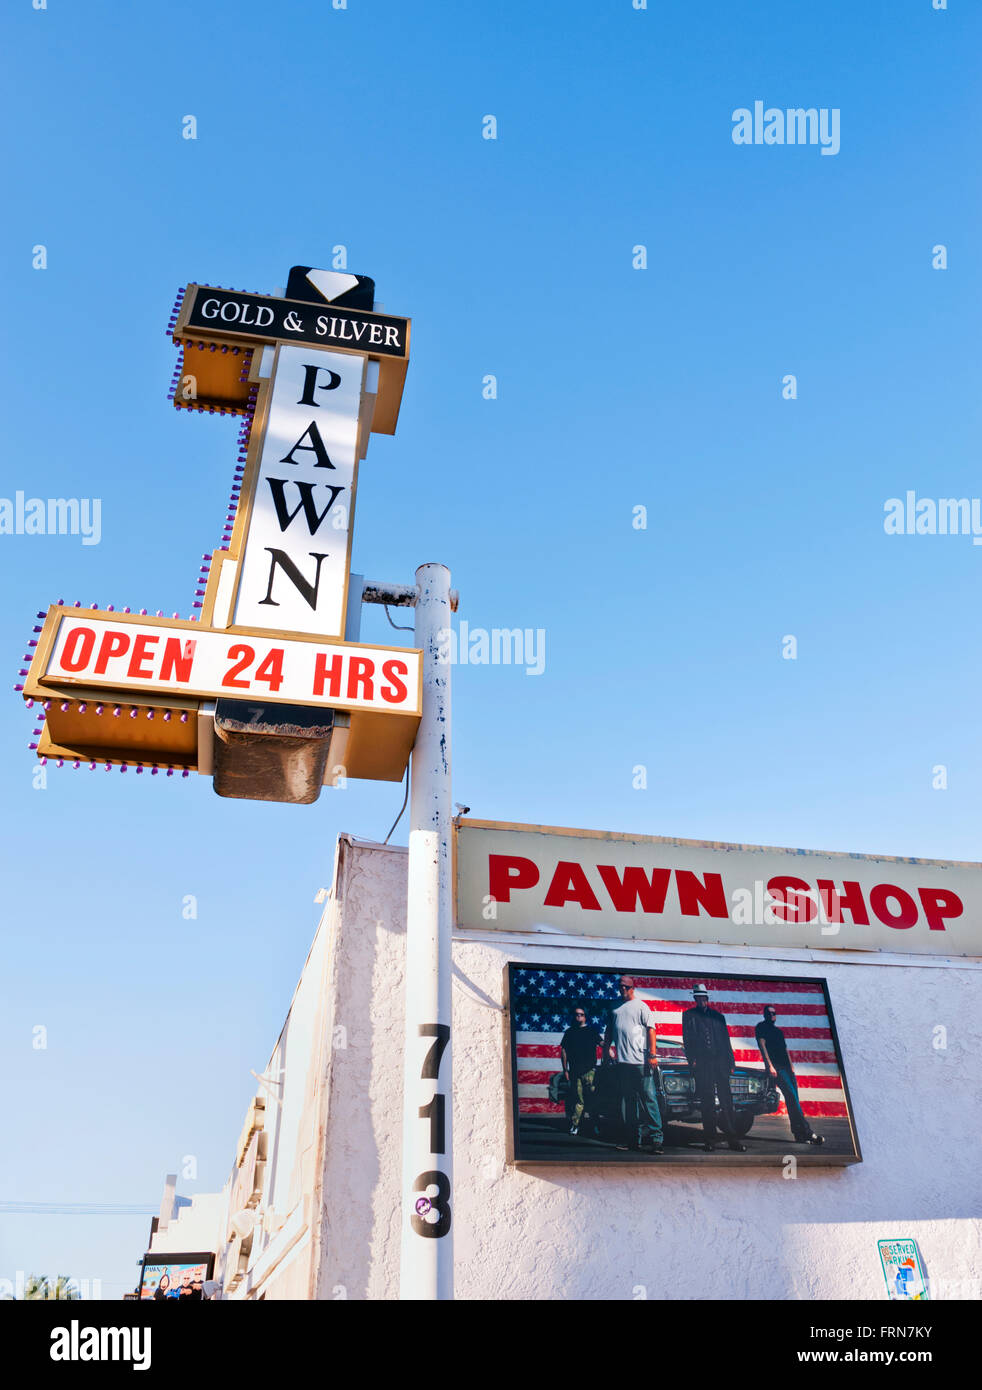 The Famous Pawnstars Pawn Stars "Gold & Silver" Pawn Shop in Las Vegas,  Nevada. Made famous by the History Channel Stock Photo - Alamy